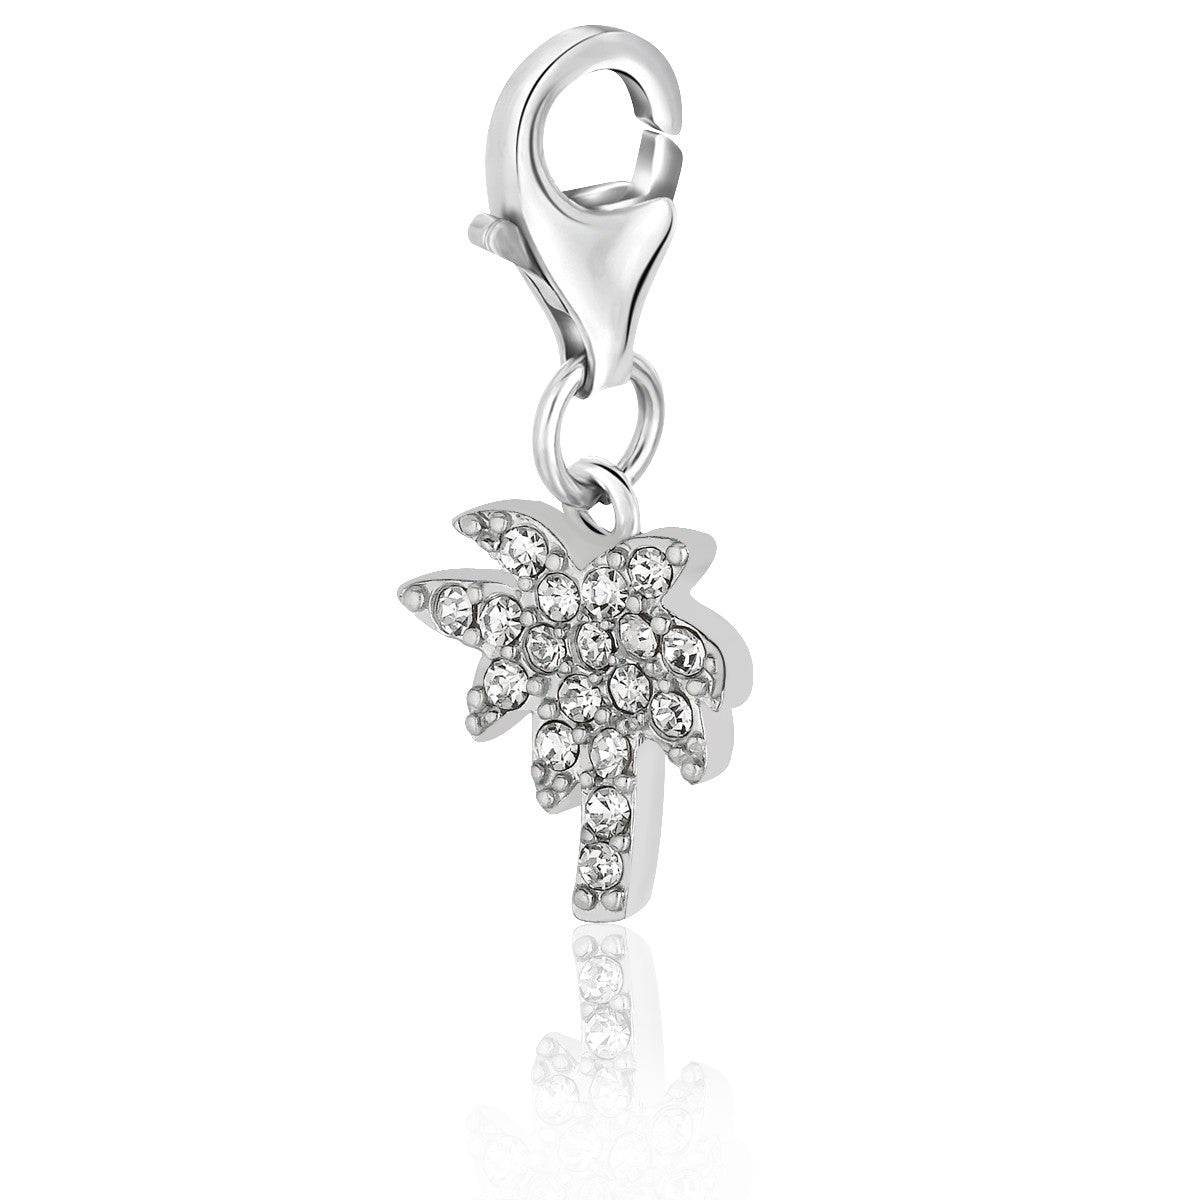 Sterling Silver White Tone Crystal Studded Palm Tree Charm